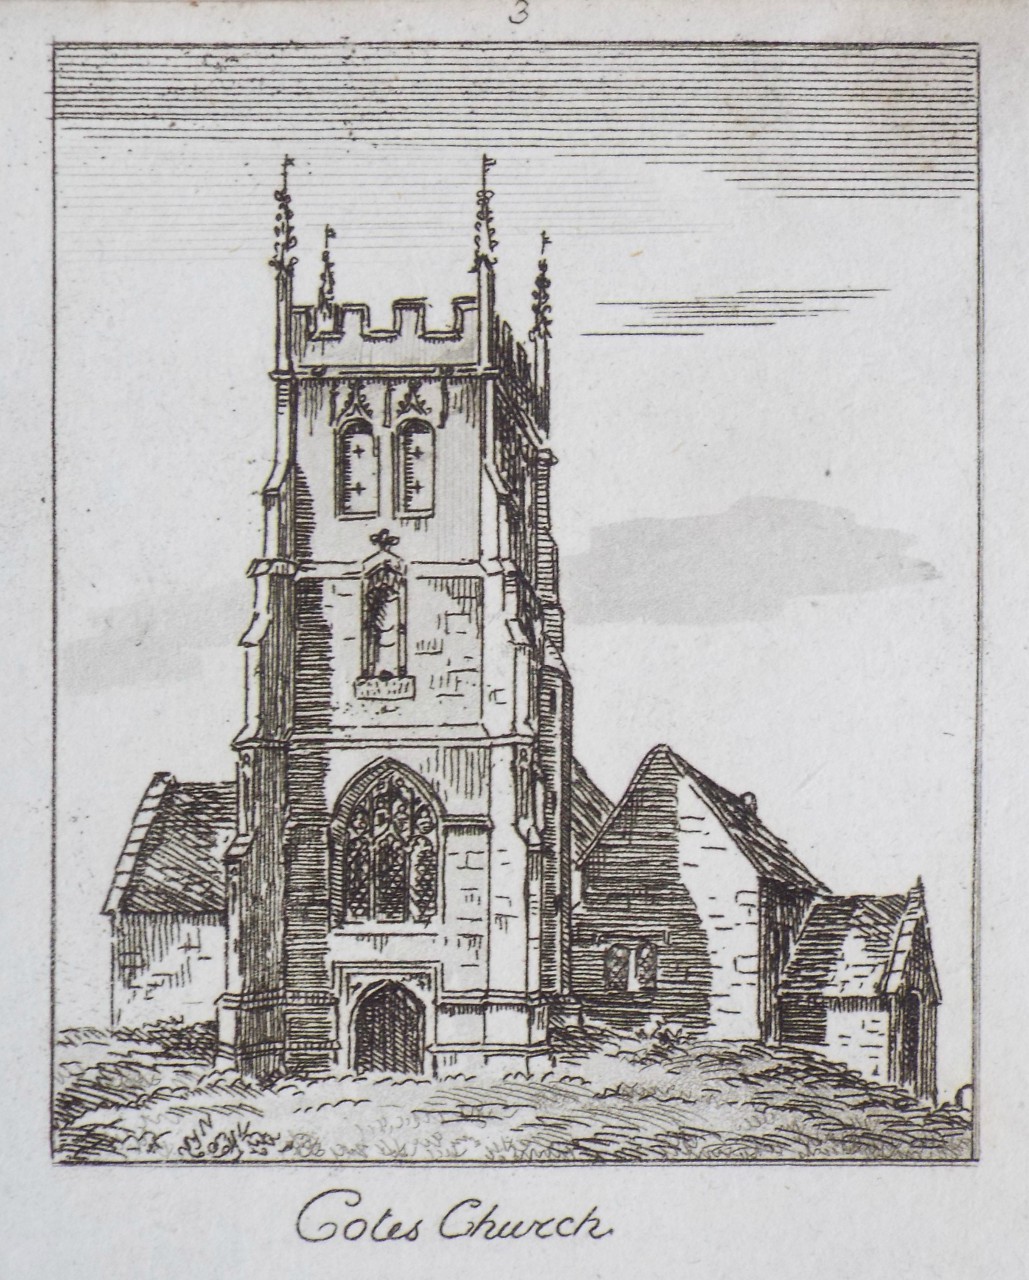 Etching with aquatint - Cotes Church